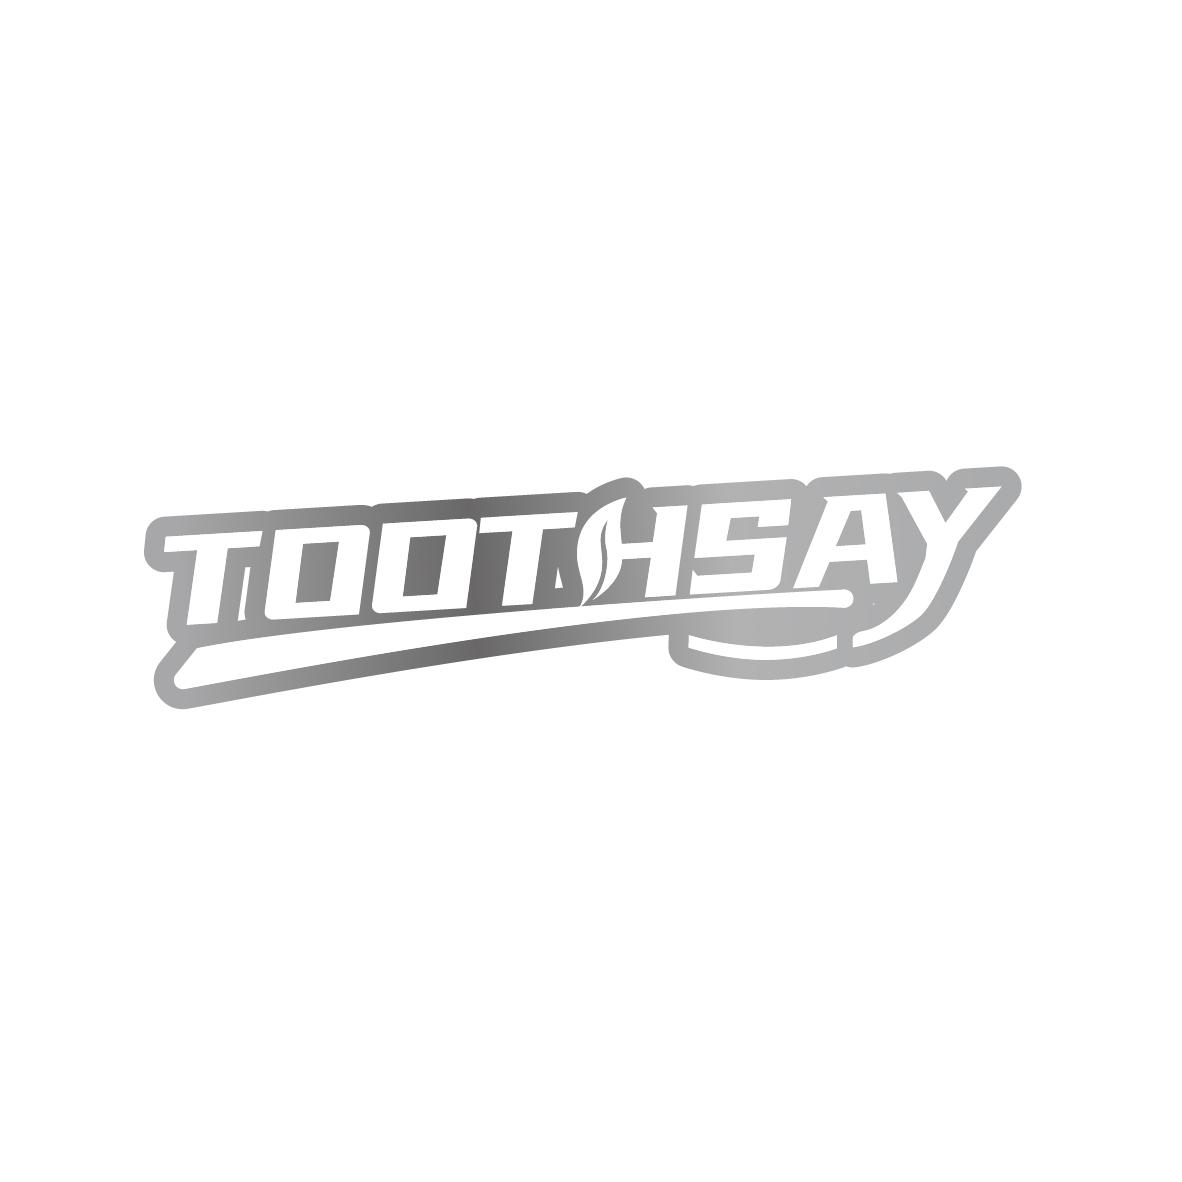 TOOTHSAY